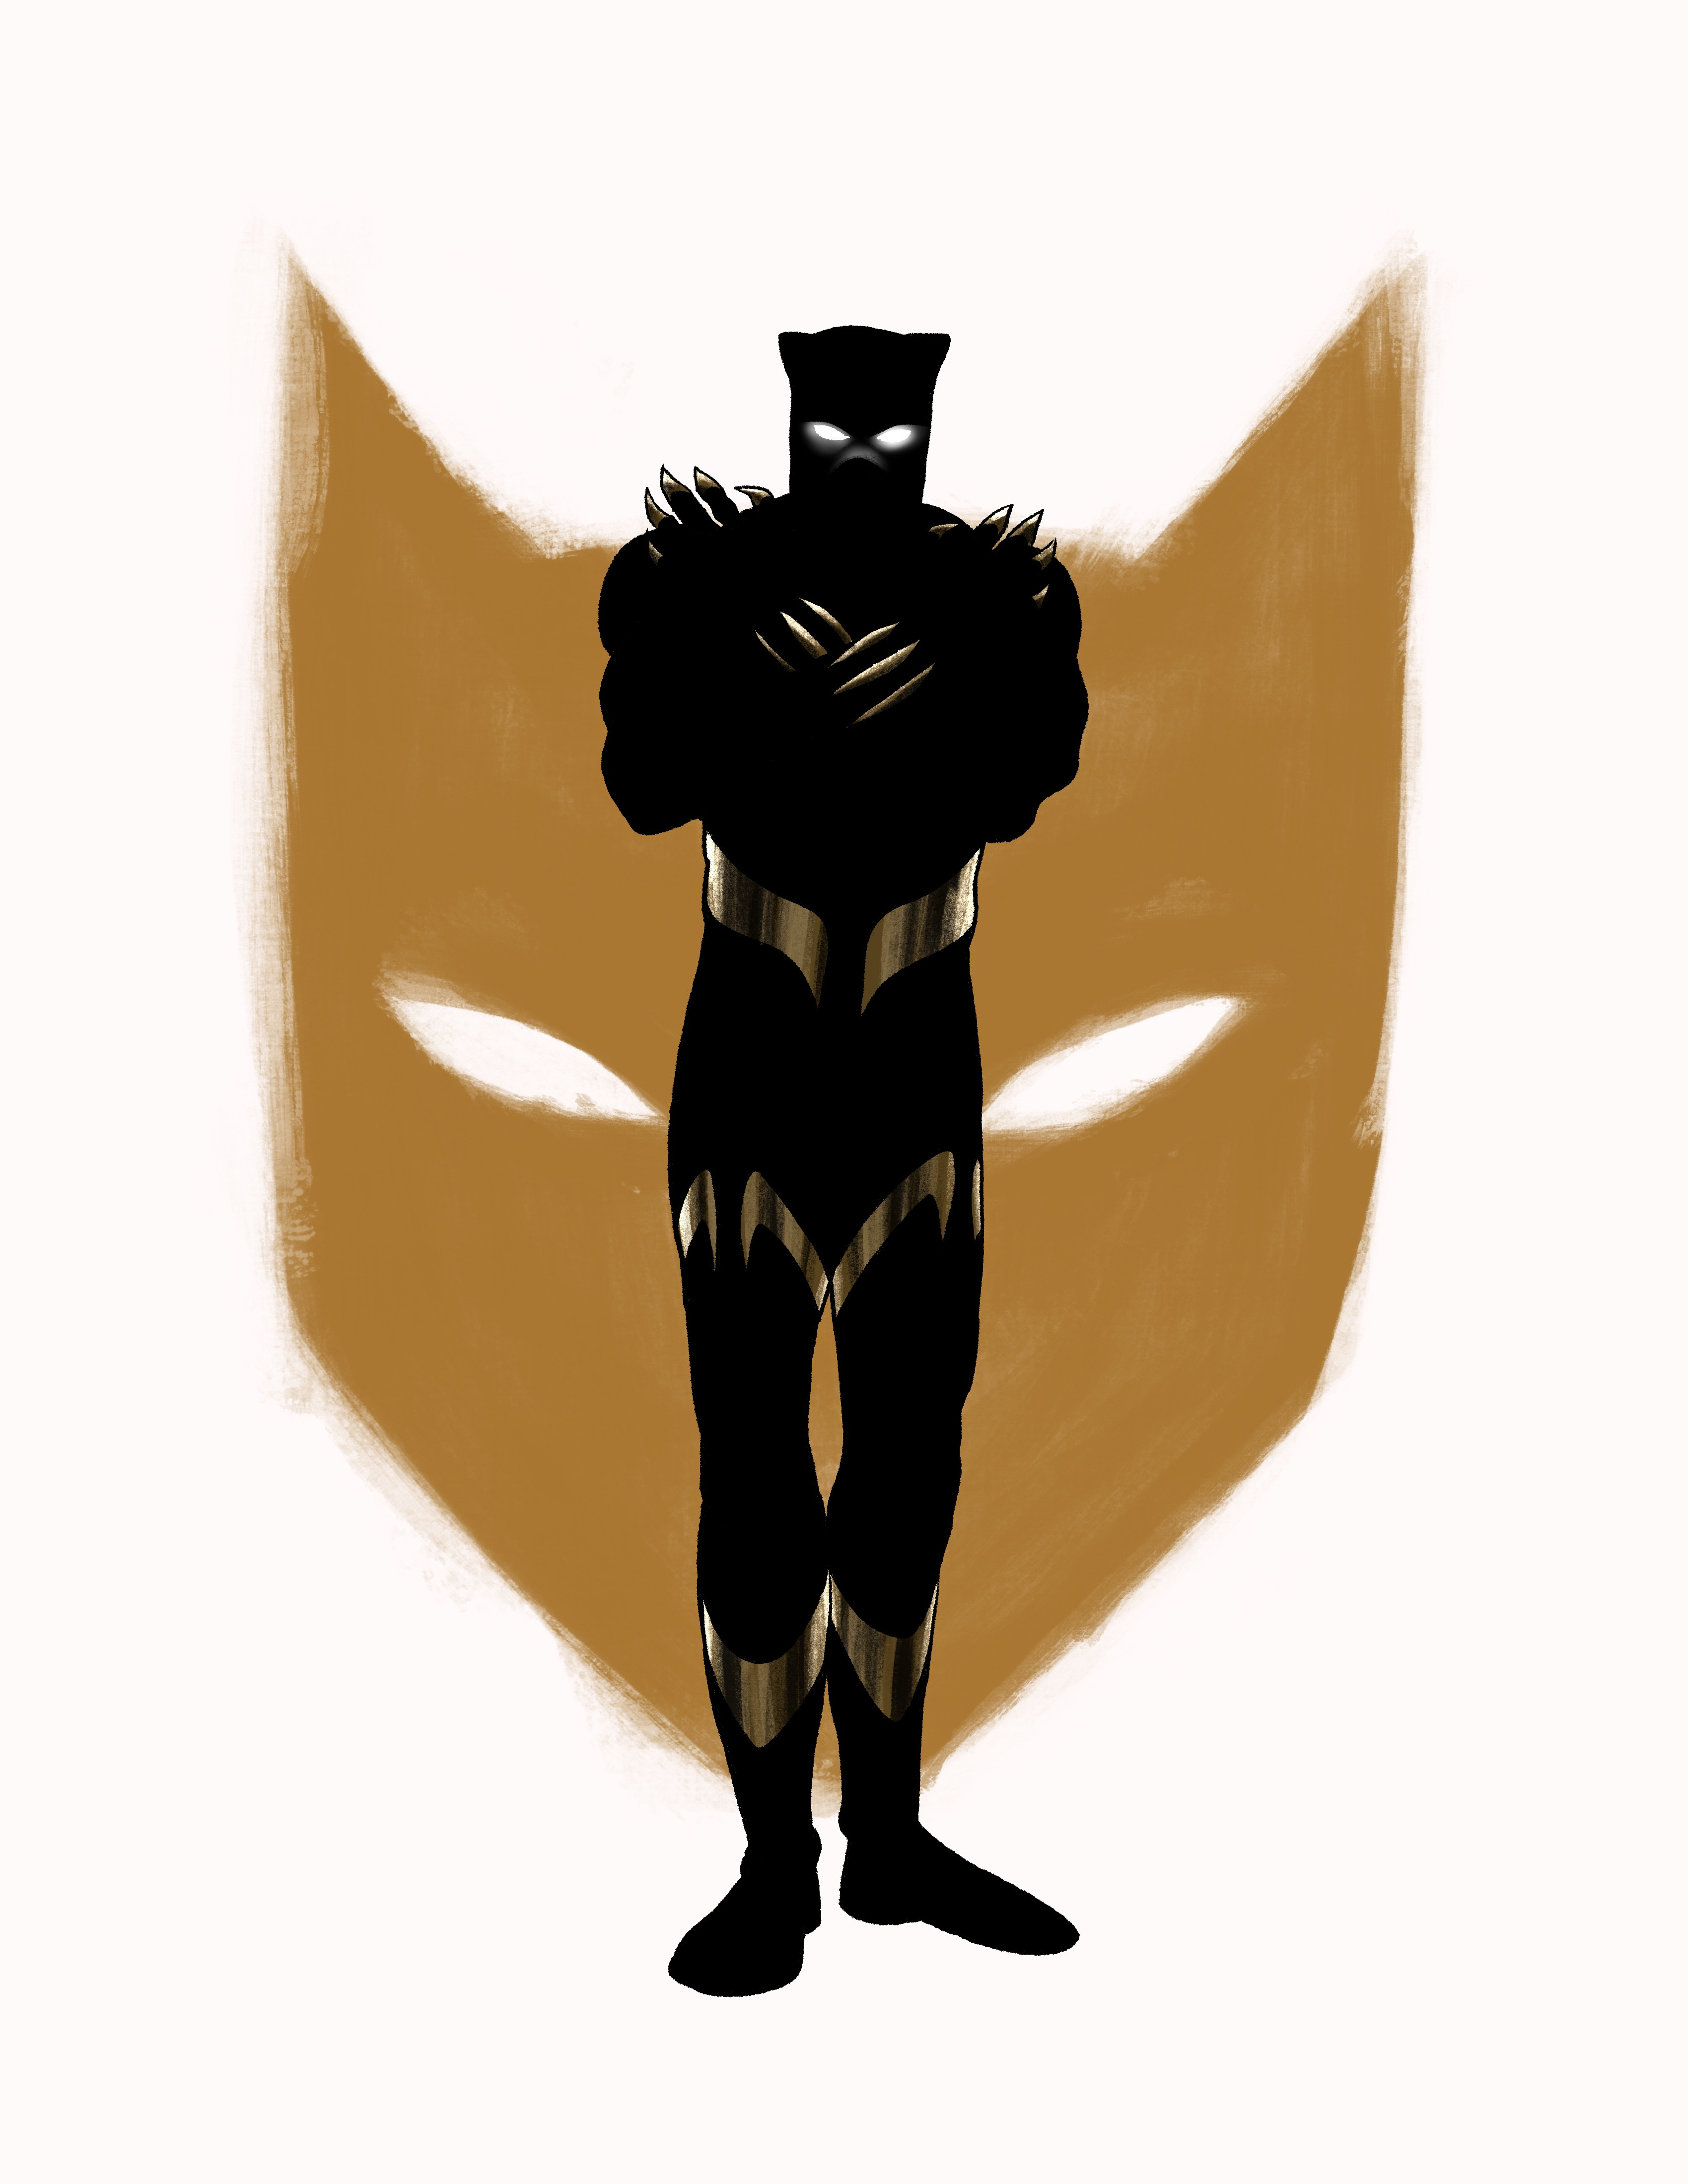 Black Panther (Gold) - Digital in Procreate